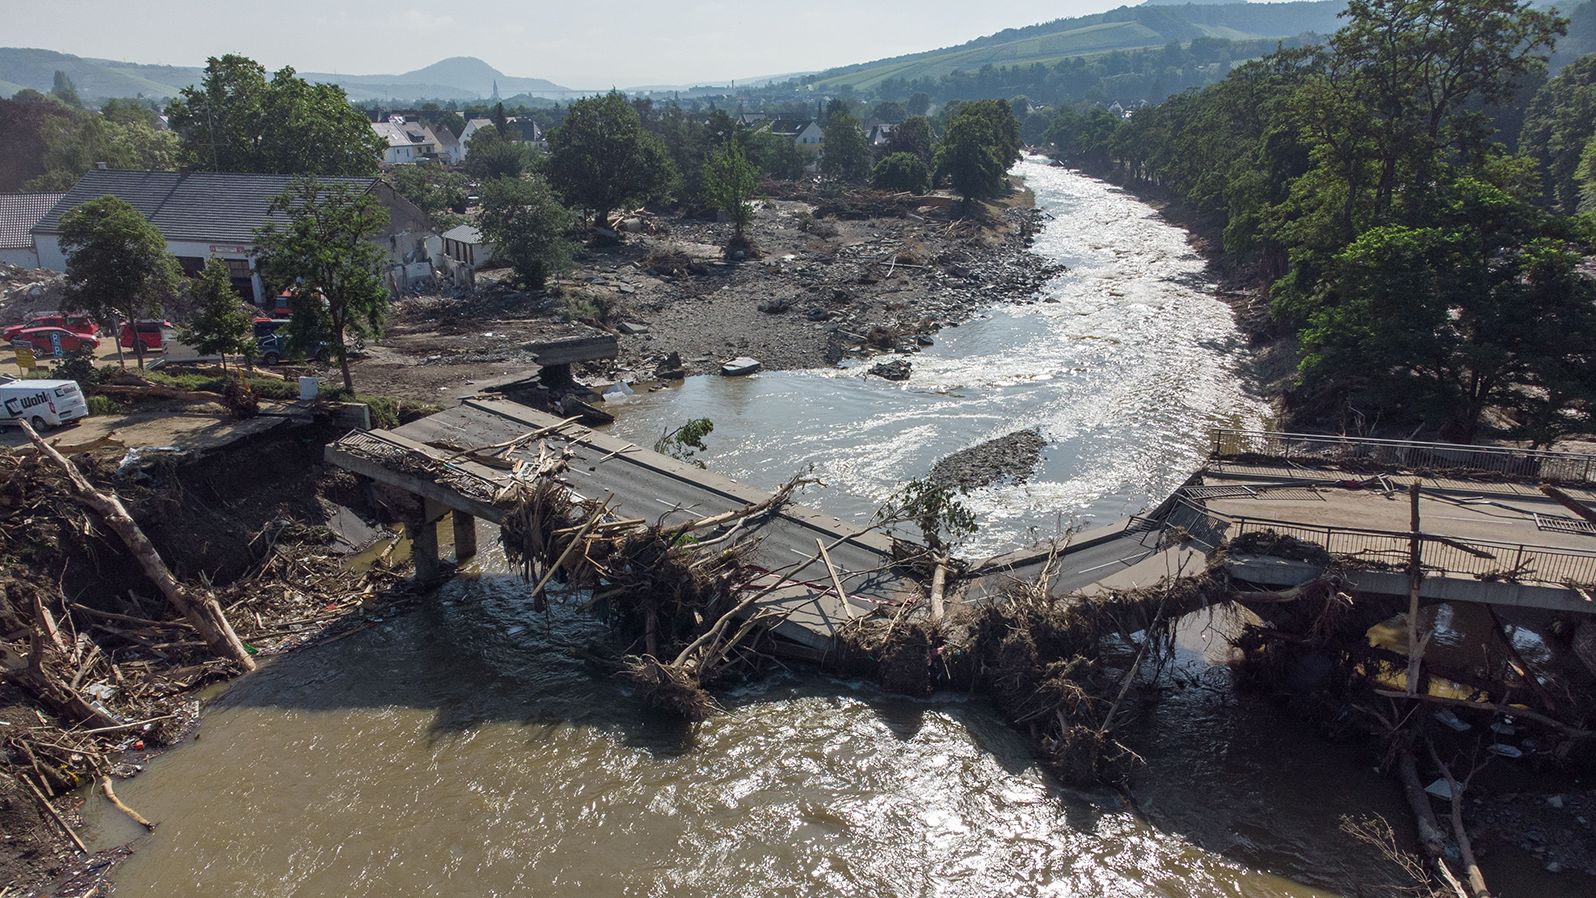 This aerial photo shows a bridge collapsed over the Ahr River in Germany's Ahrweiler district on Sunday.